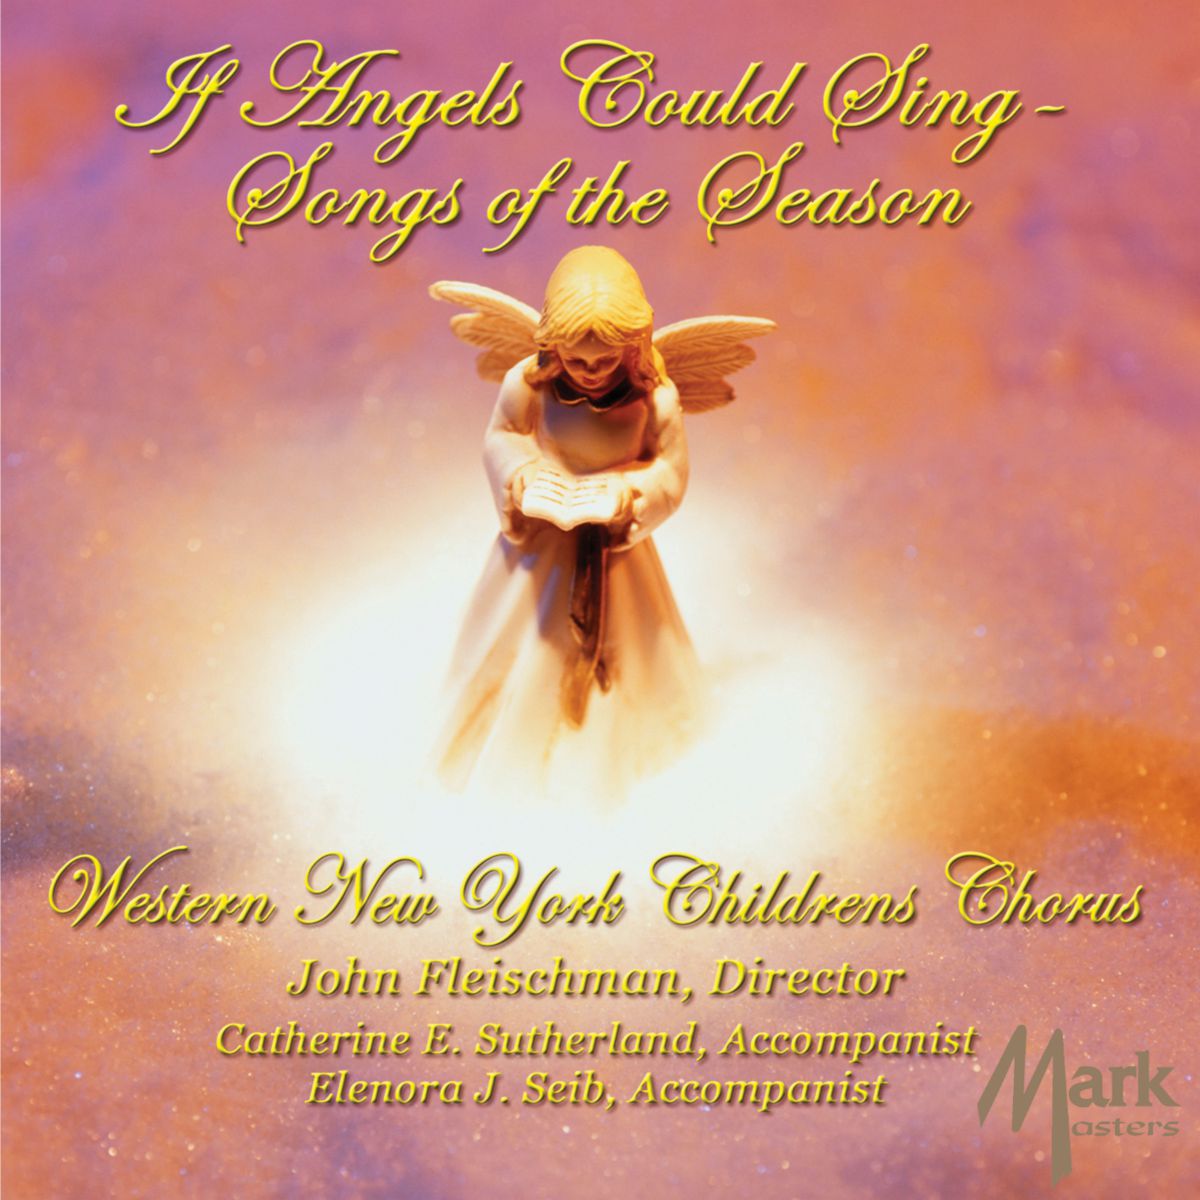 If Angels Could Sing: Songs of the Season - click here